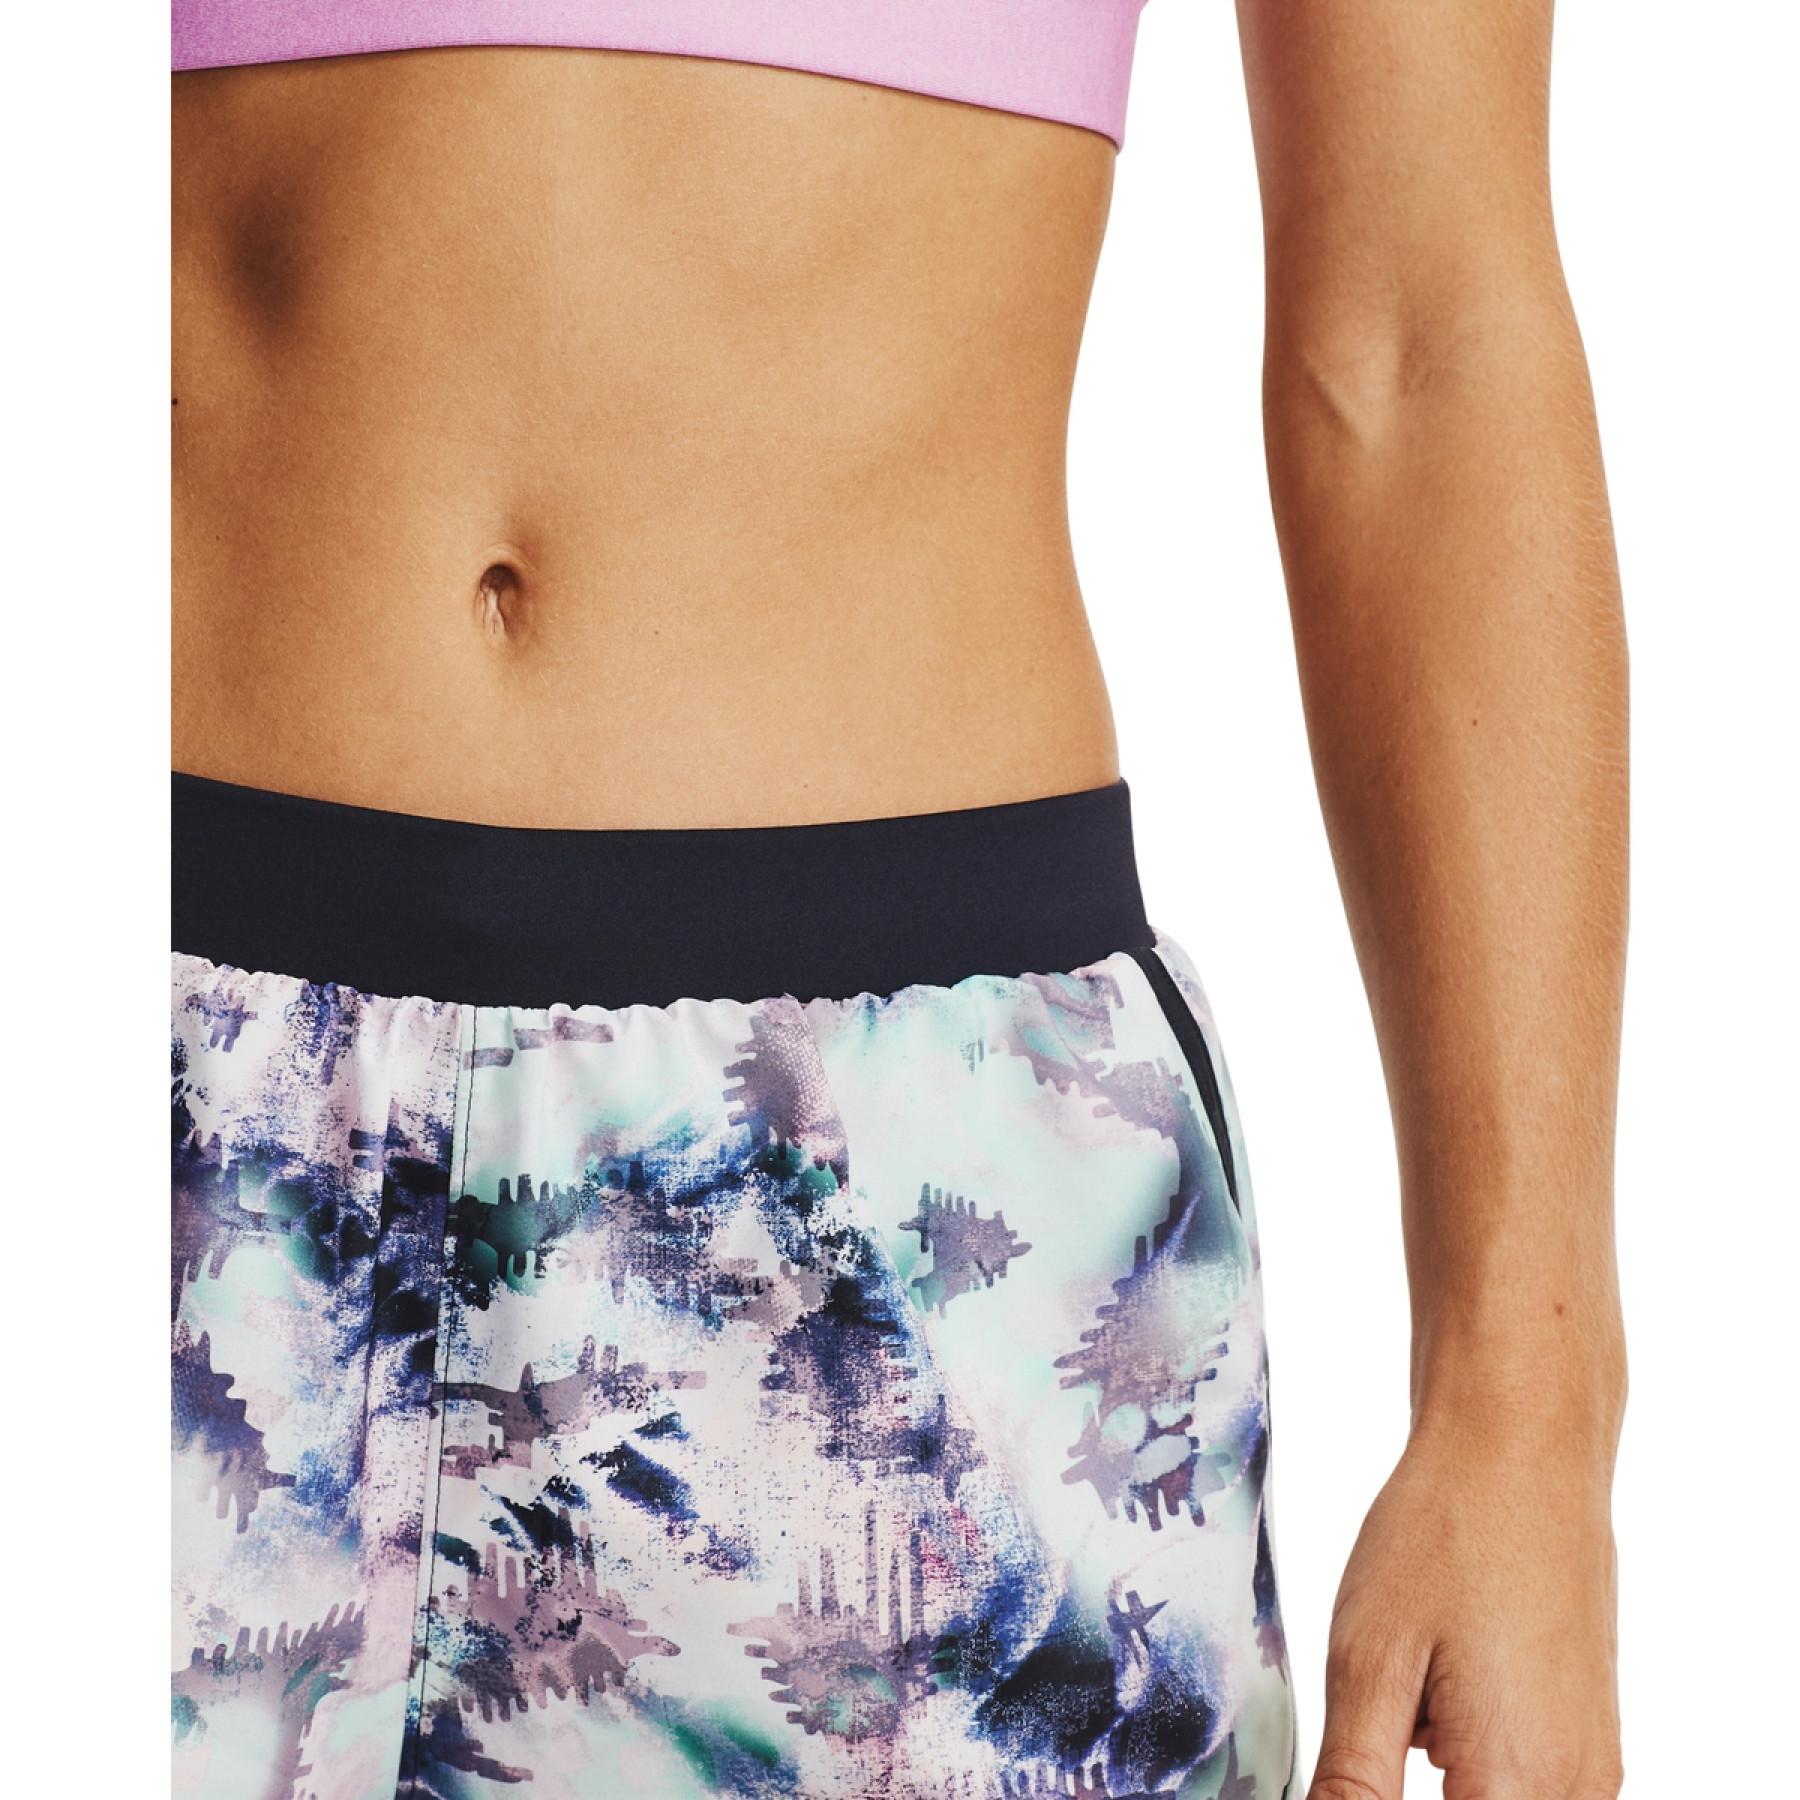 Women's shorts Under Armour Fly-By 2.0 imprimé